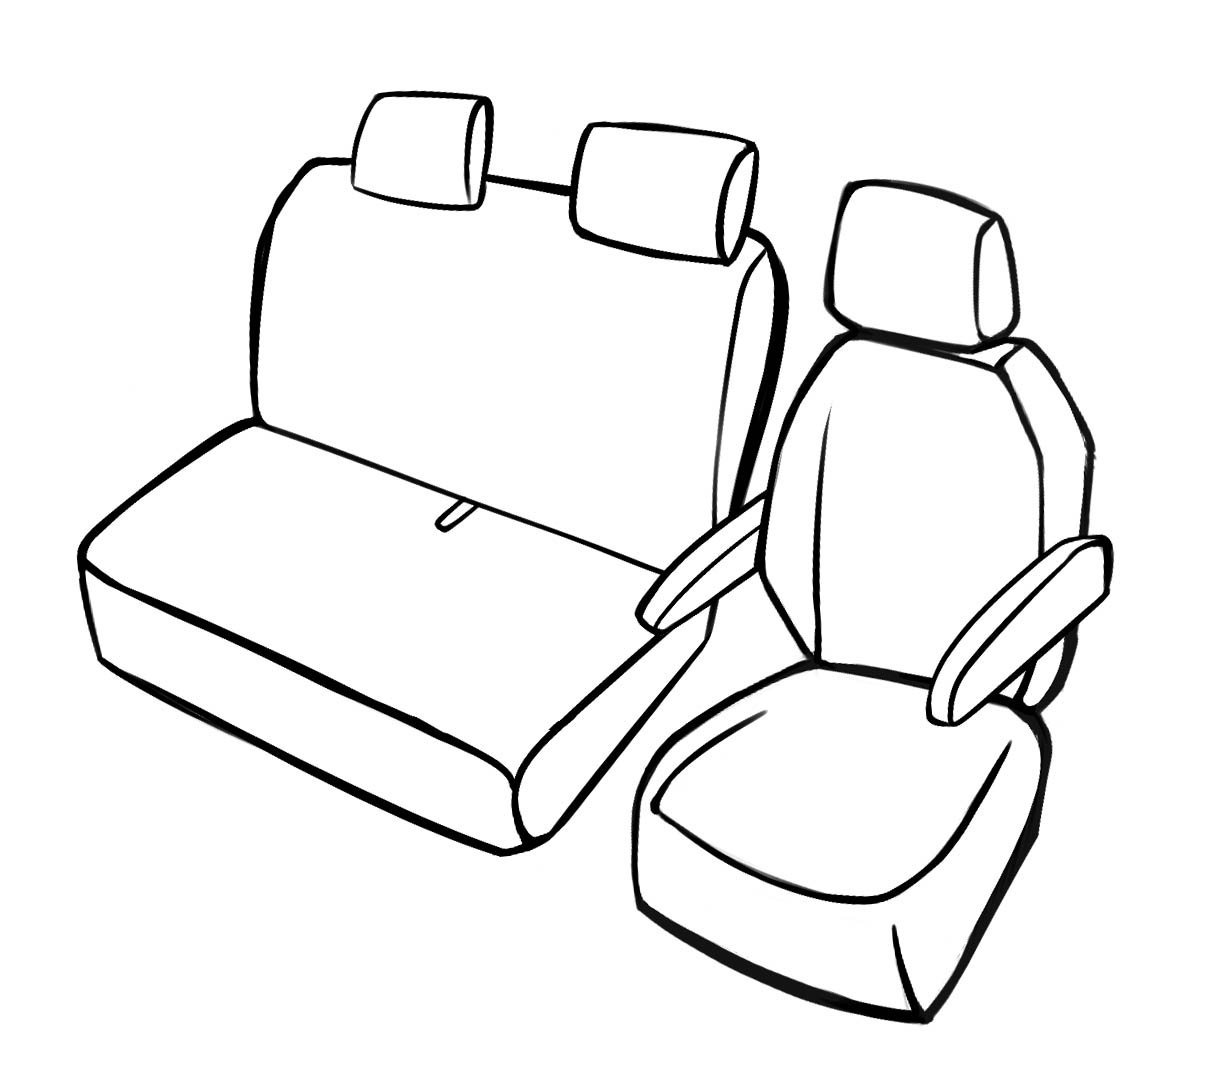 Premium Seat Cover for VW Crafter 2016-Today, 1 single seat cover front + armrest cover, 1 double bench cover